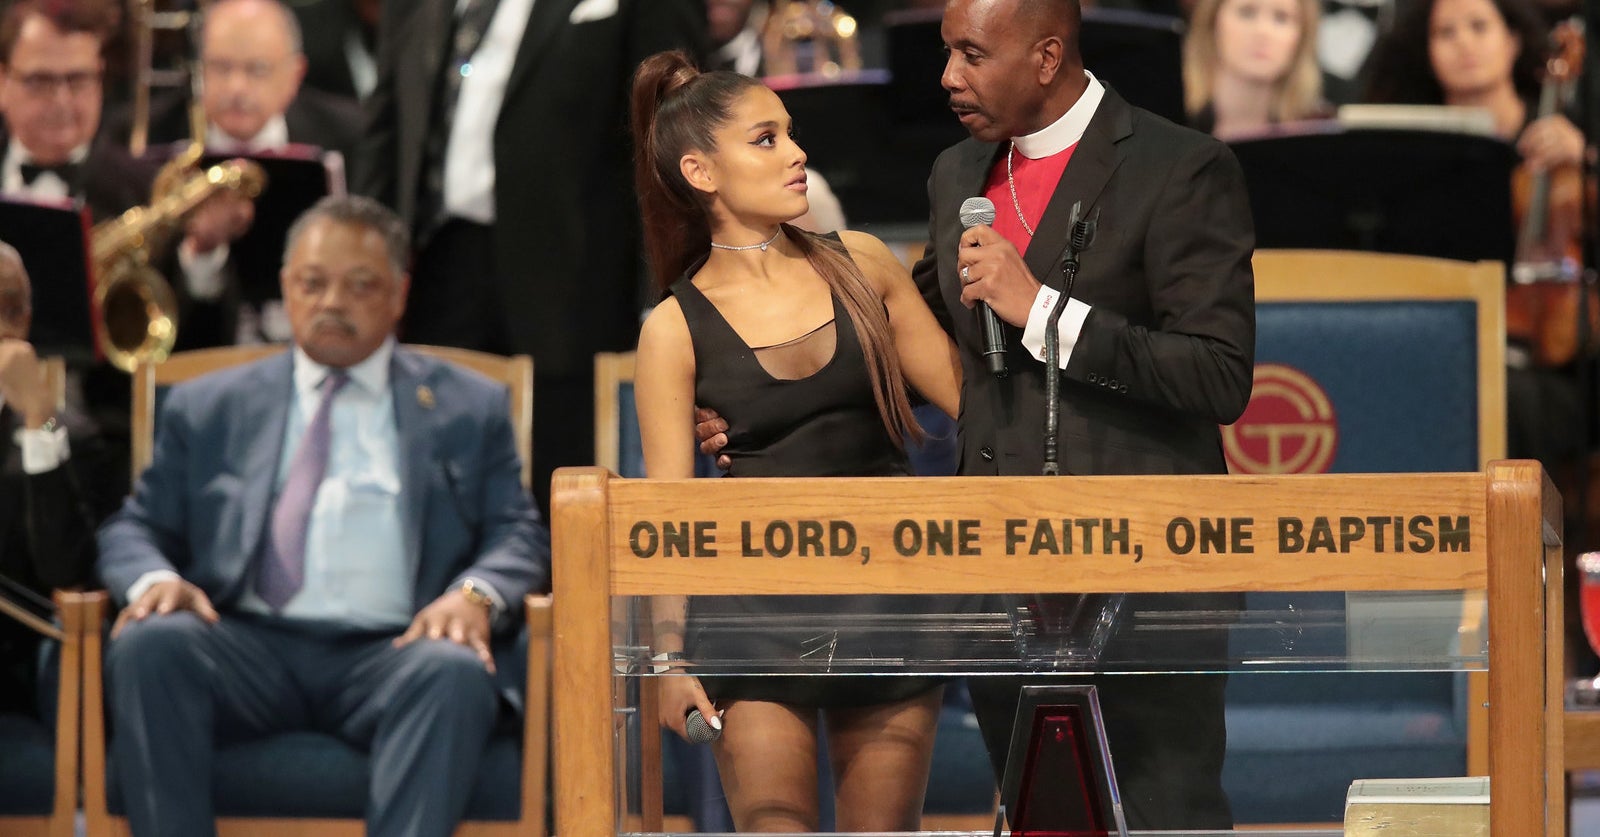 Ariana Grande Orgasm Porn - Ariana Grande Is Treating A Bishop Touching Her Breast As An Accident,  Police Said